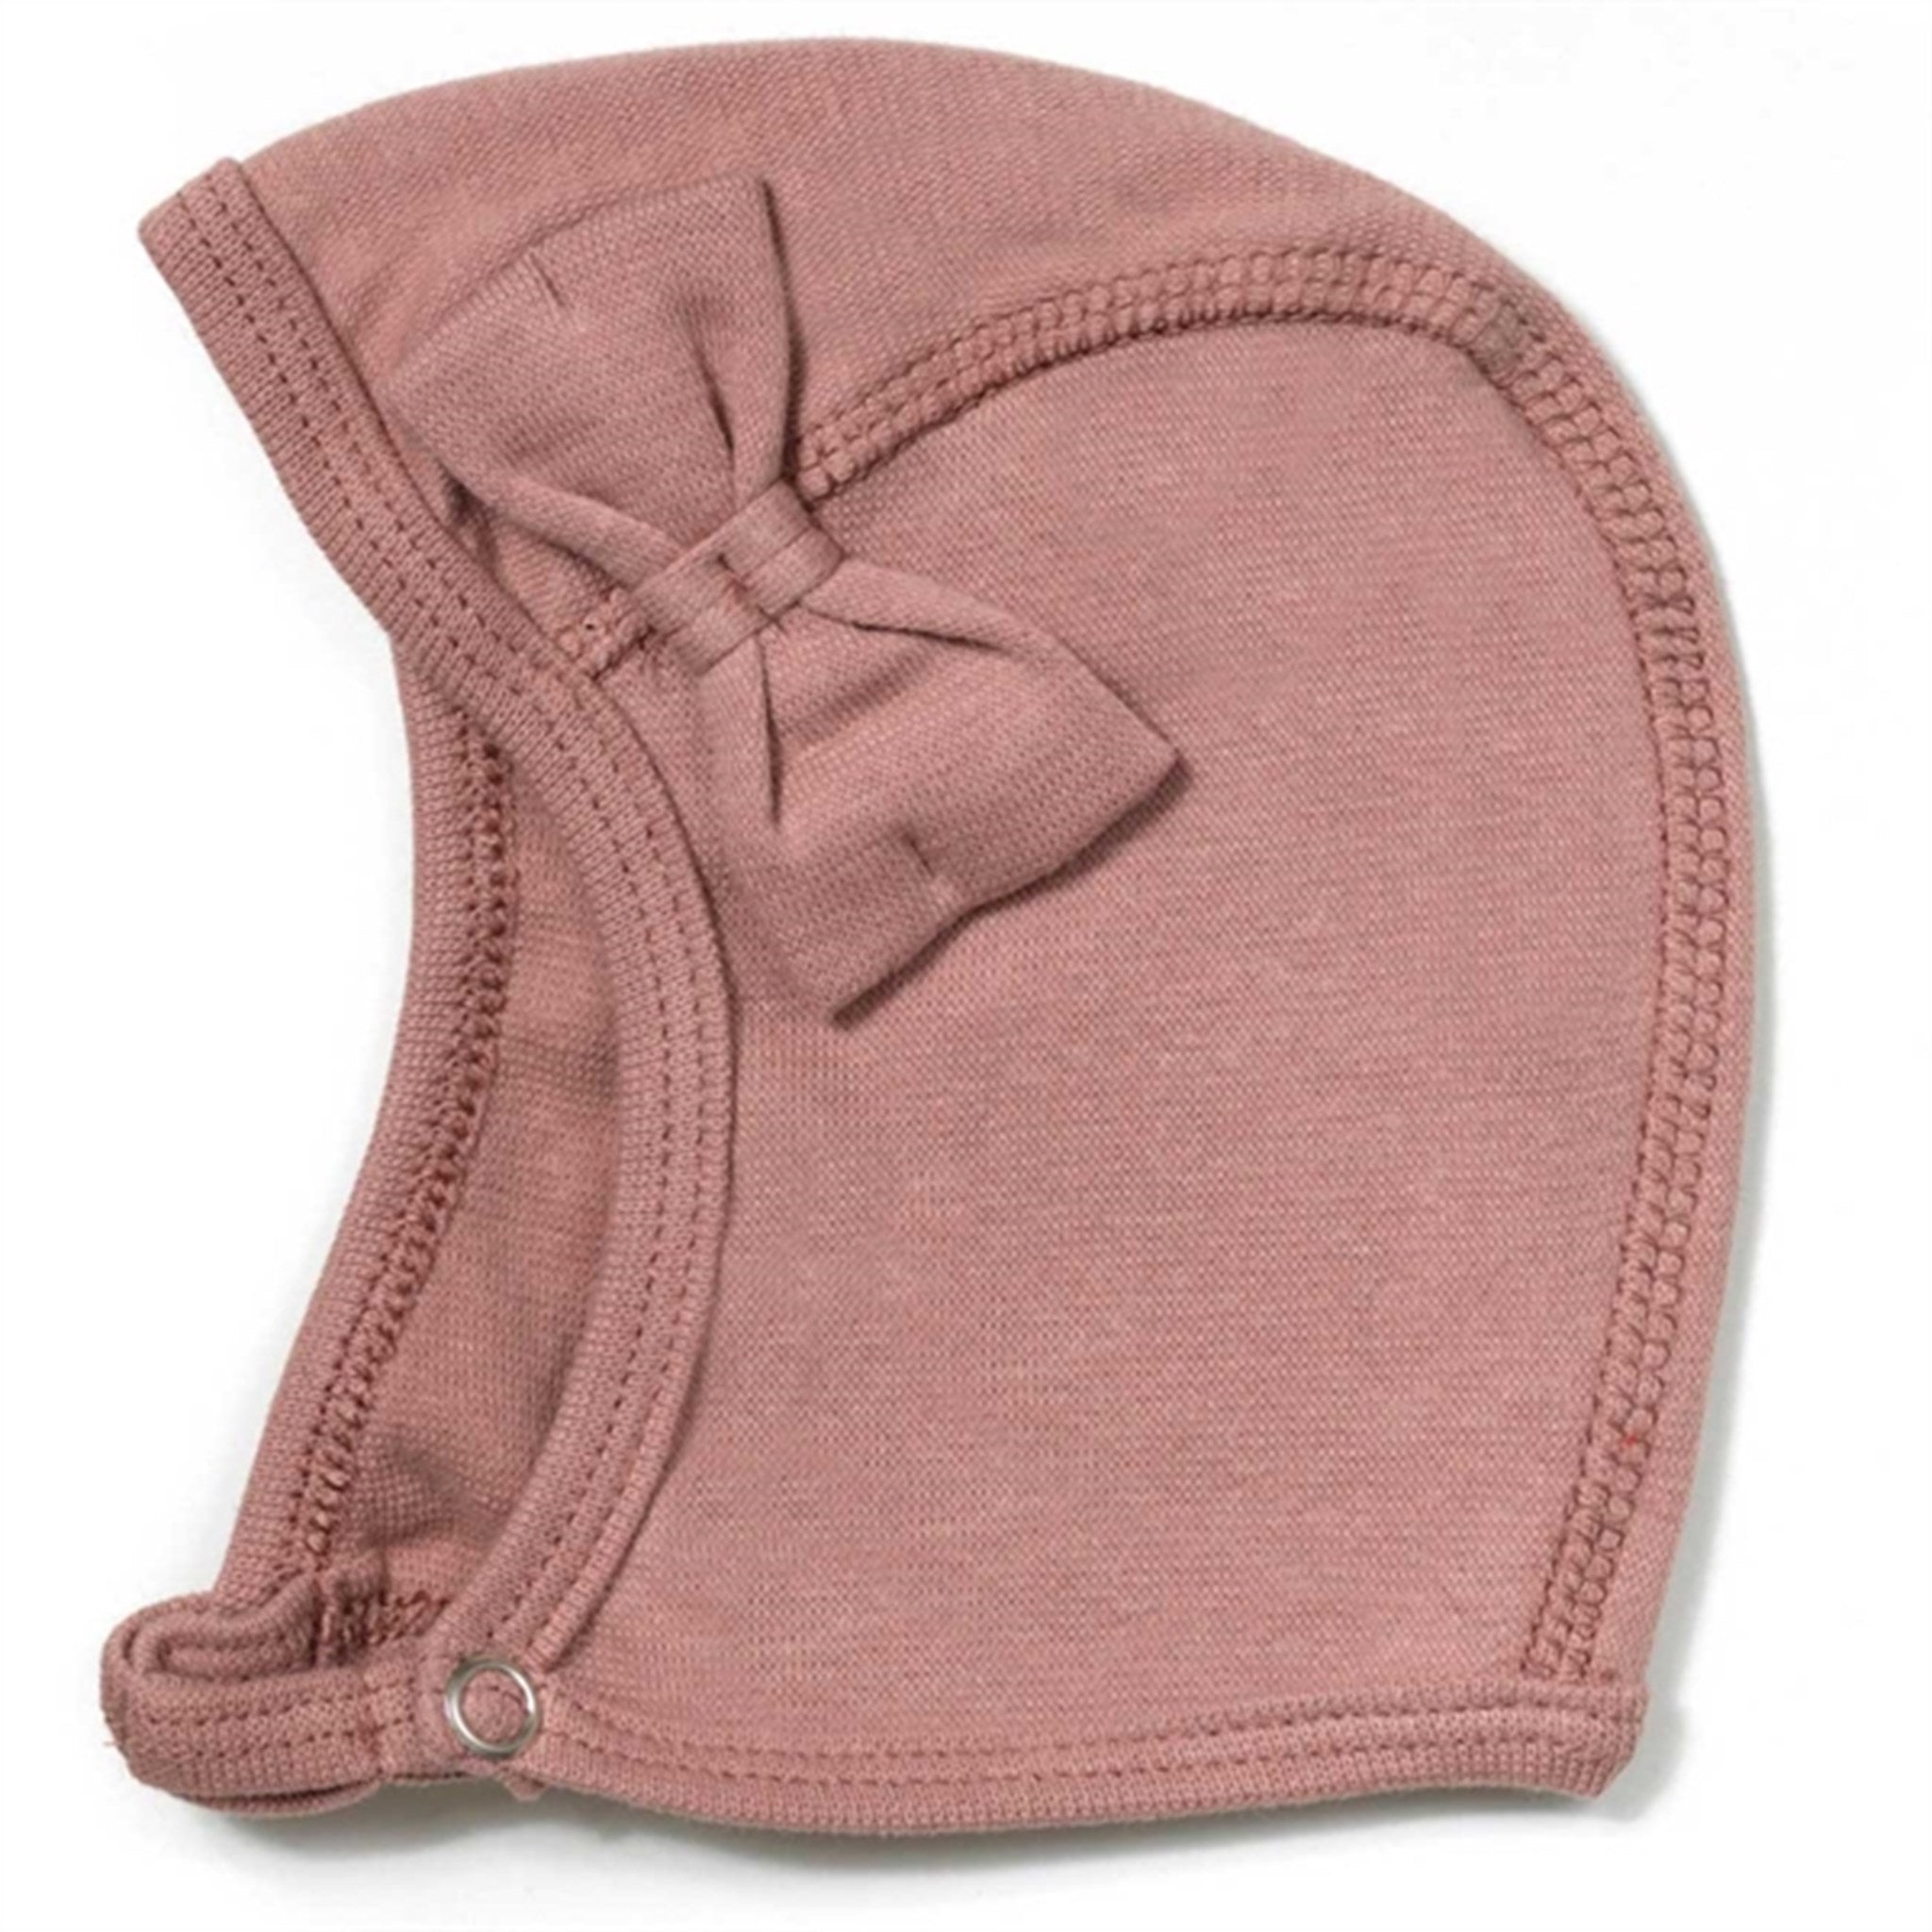 Racing Kids Baby Hat Bow Dusty Rose